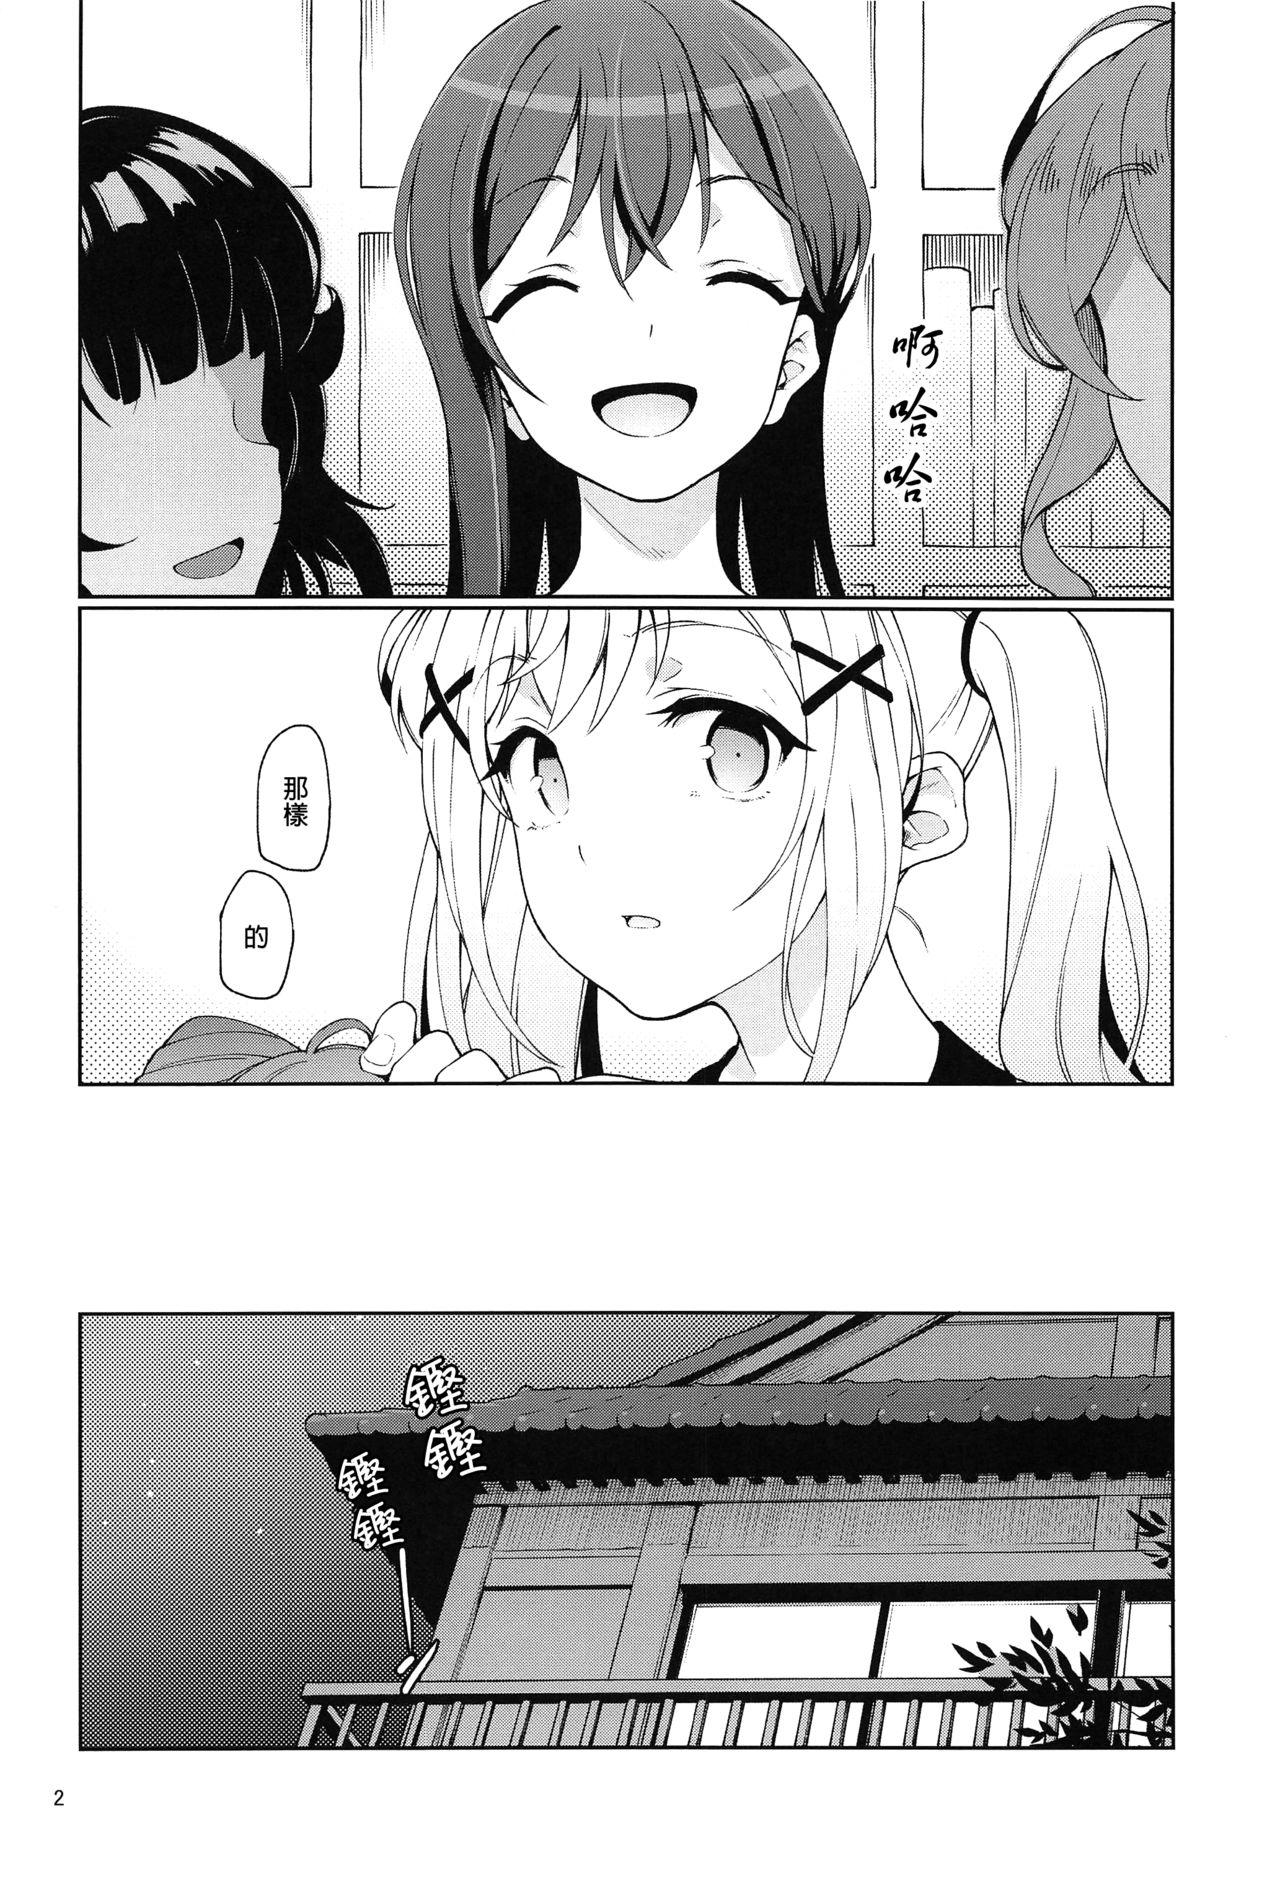 Ginger Jealousy All Night - Bang dream Huge Ass - Page 4